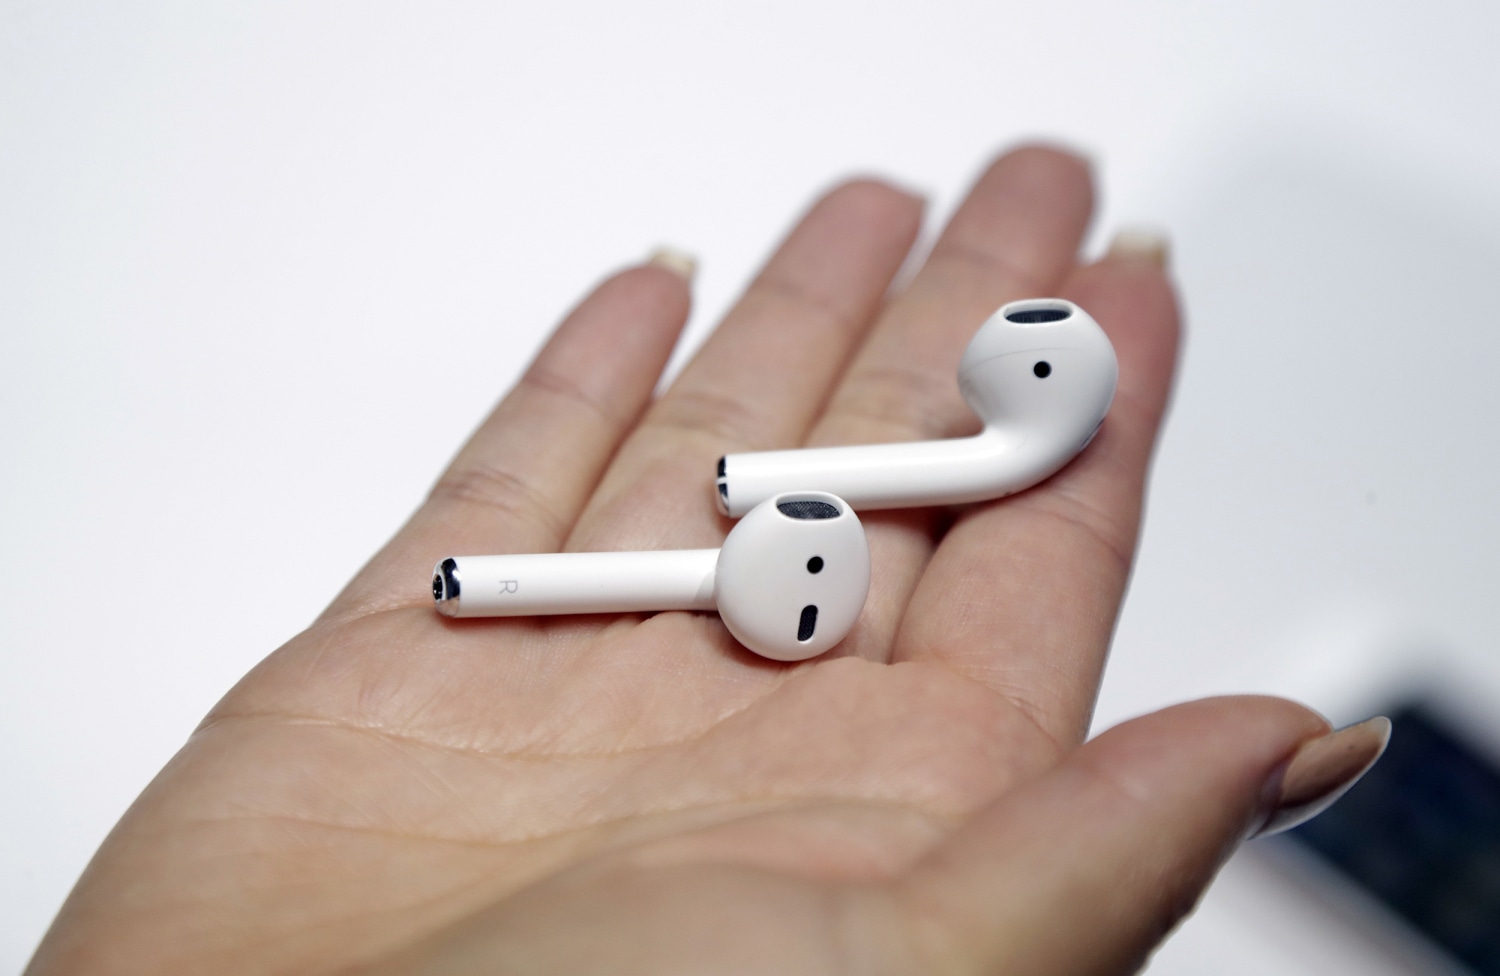 Apple's AirPods changed everything. They gave the company